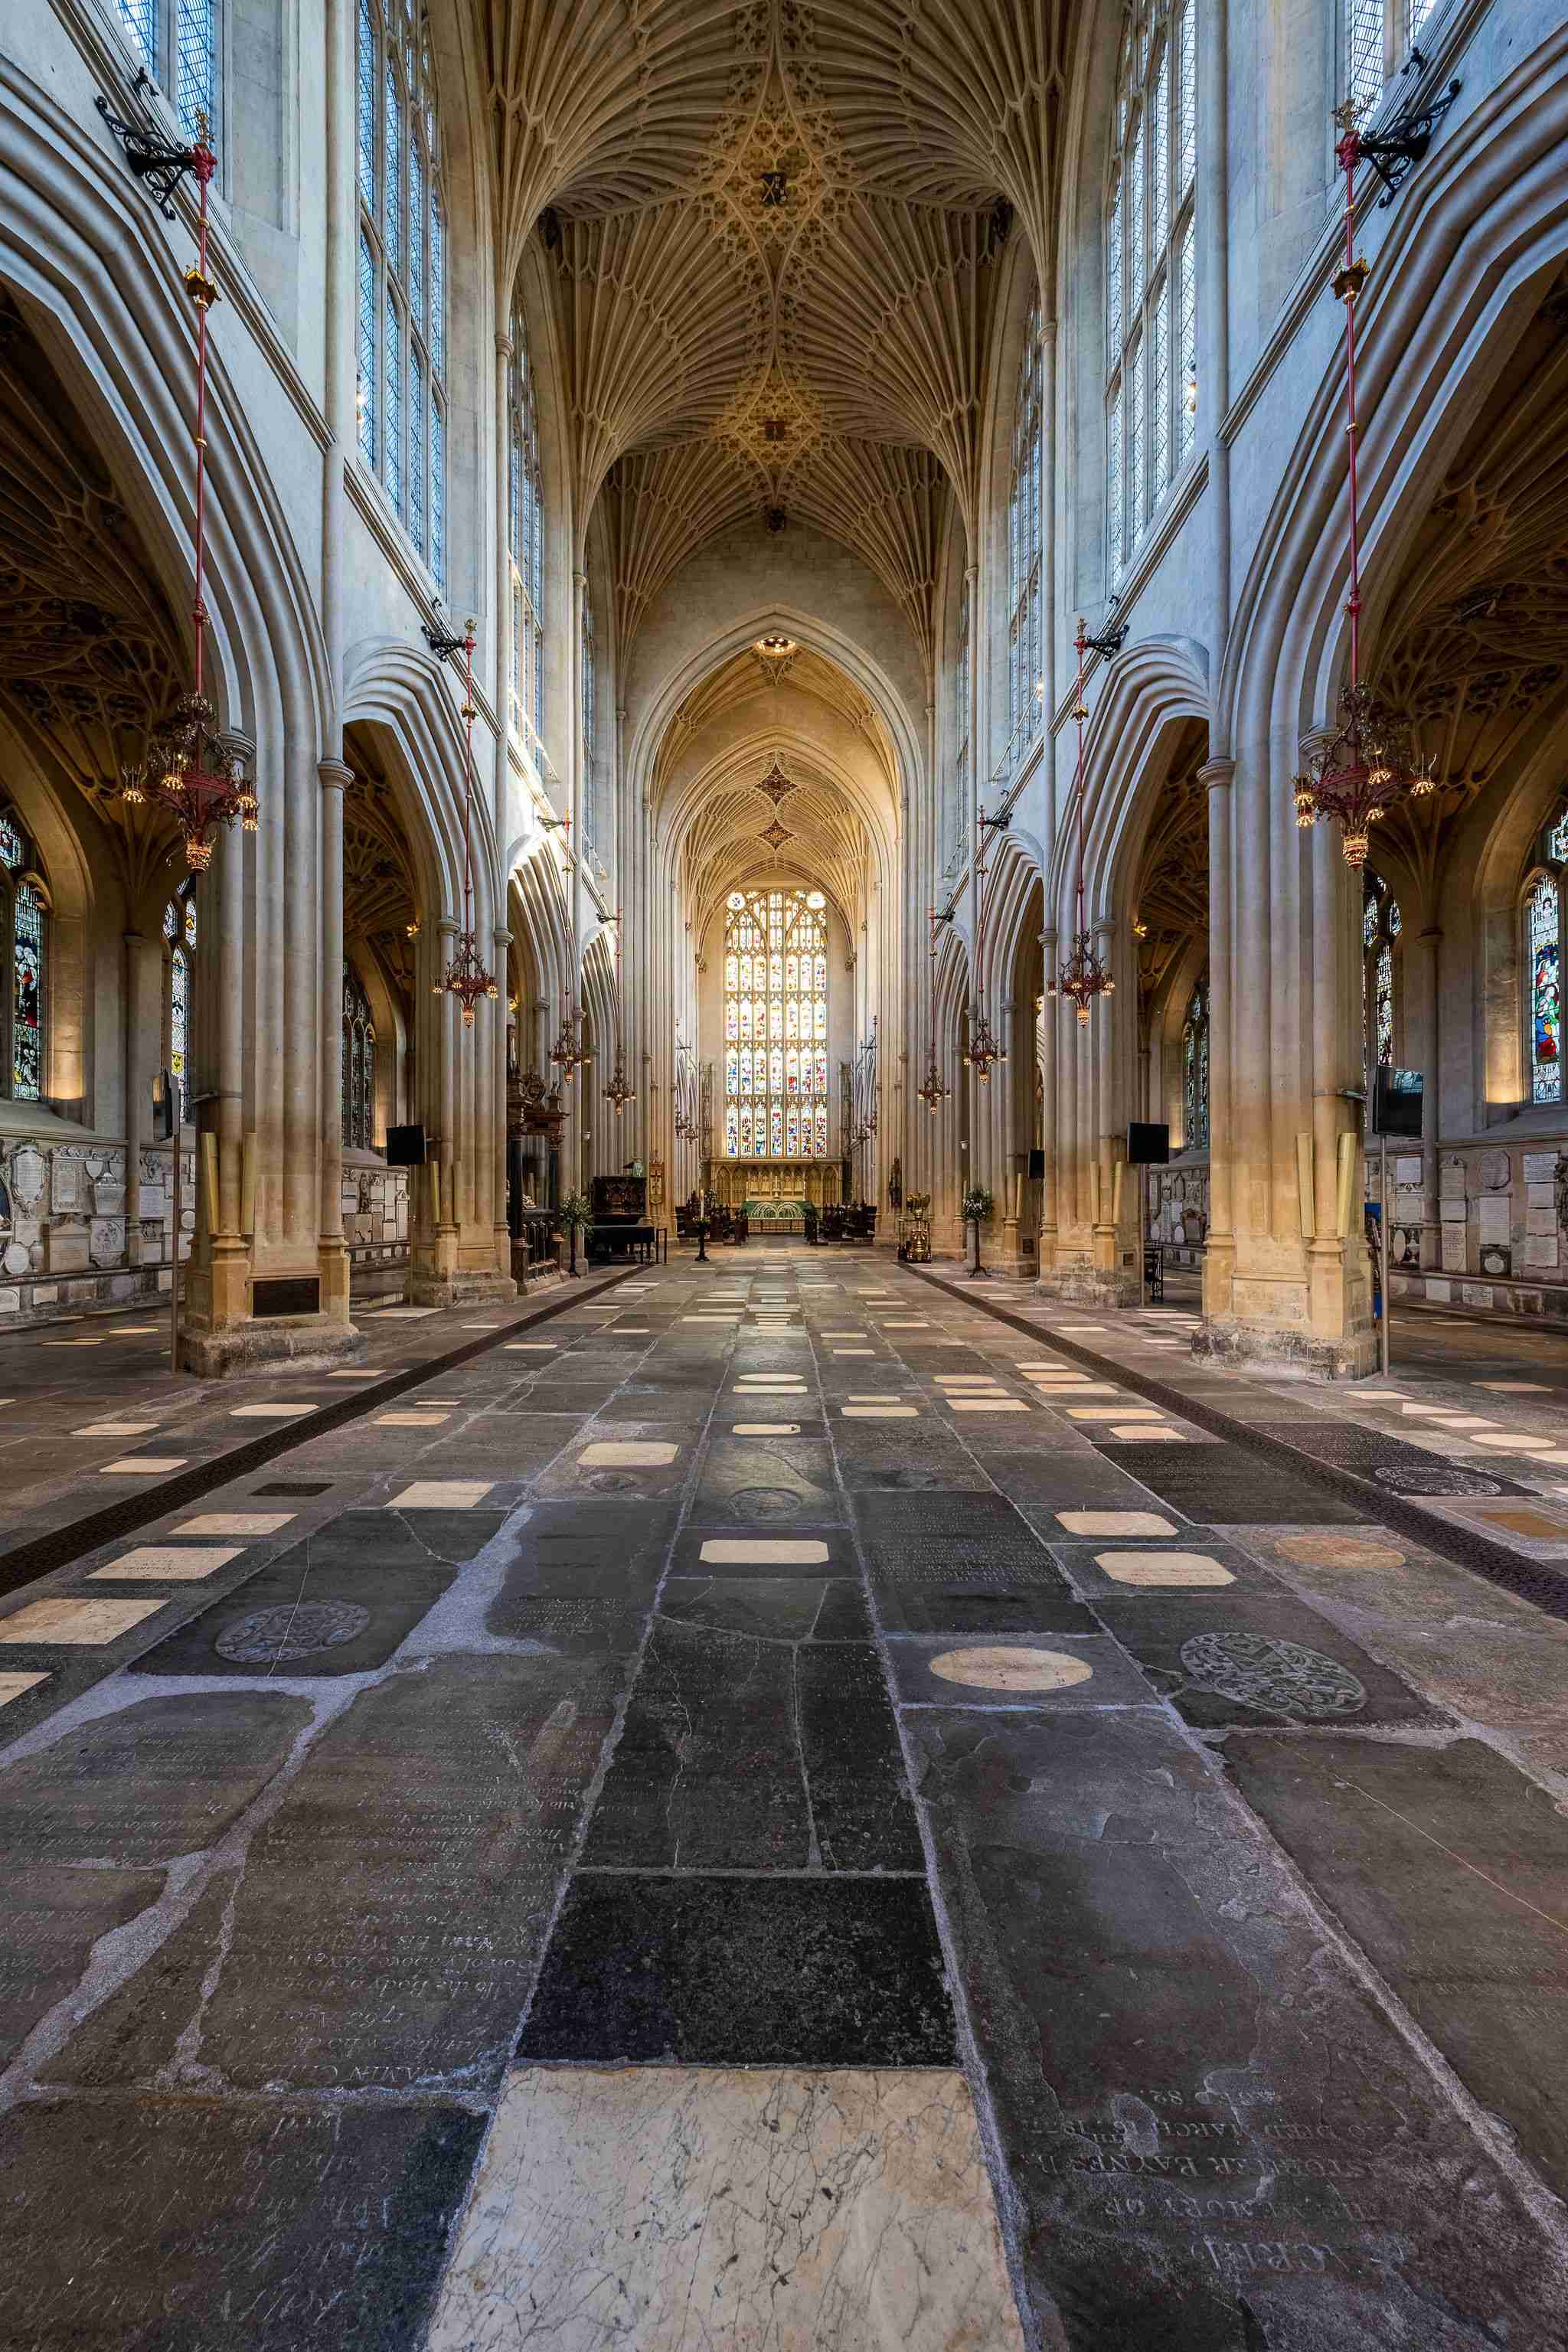 Memorial ledgerstones on Bath Abbey's floor, looking down the nave towards the altar and east window